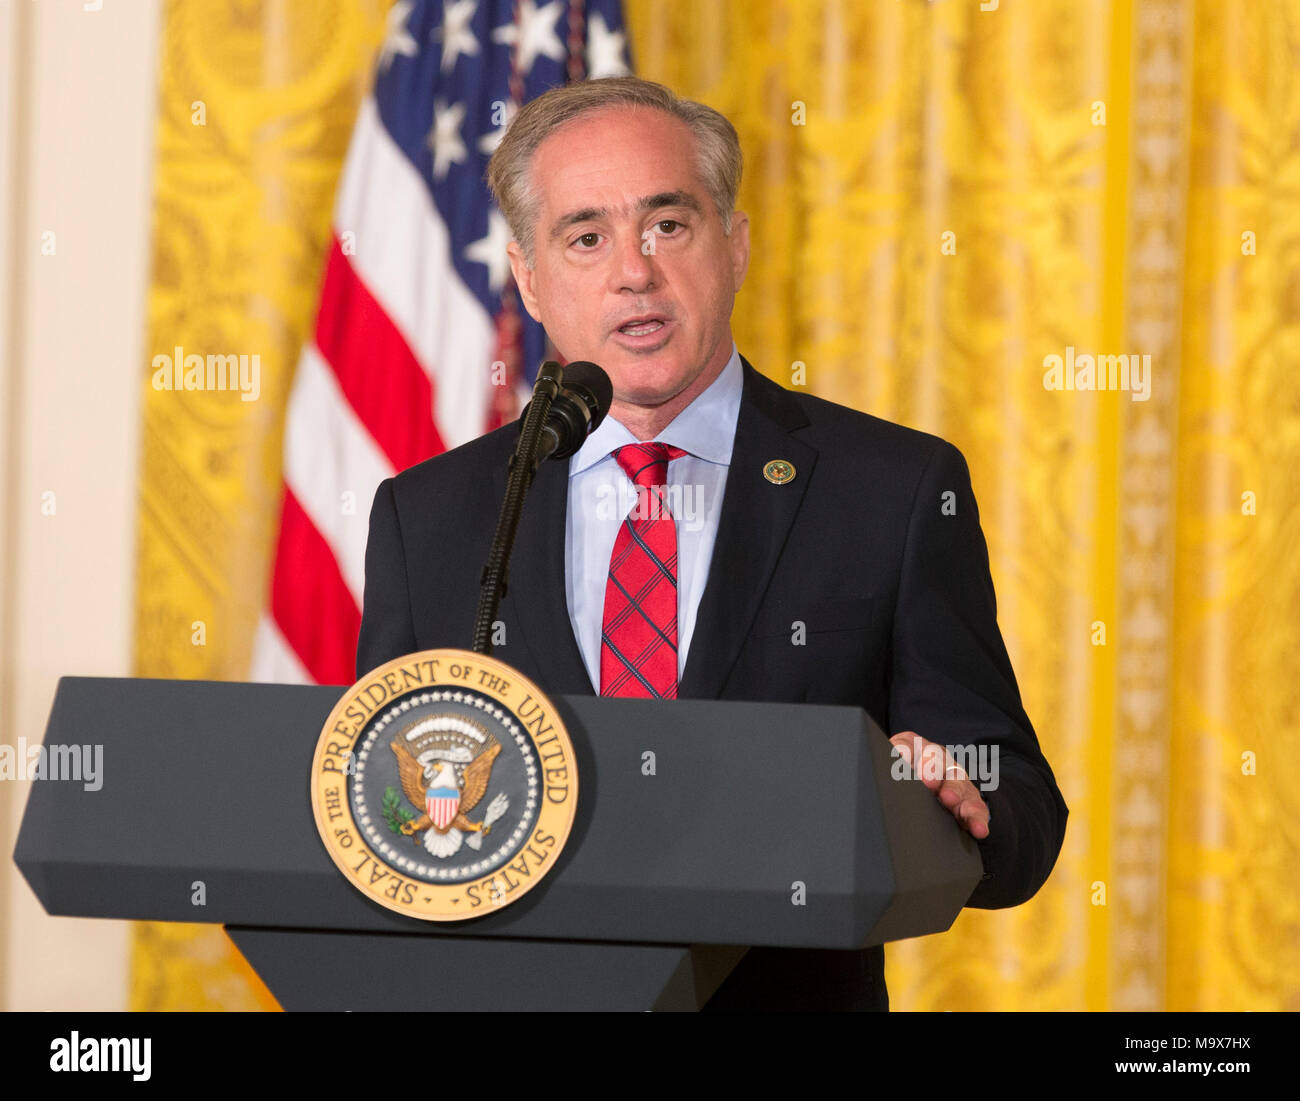 ***FILE PHOTO** VETERANS AFFAIRS SECRETARY AXED VIA TRUMP TWEET United States Secretary of Veterans Affairs Dr. David Shulkin speaks at the signing of the Department of Veterans Affairs Accountability and Whistleblower Protection Act of 2017 at The White House in Washington, DC, June 23, 2017. Credit: Chris Kleponis/CNP /MediaPunch Stock Photo